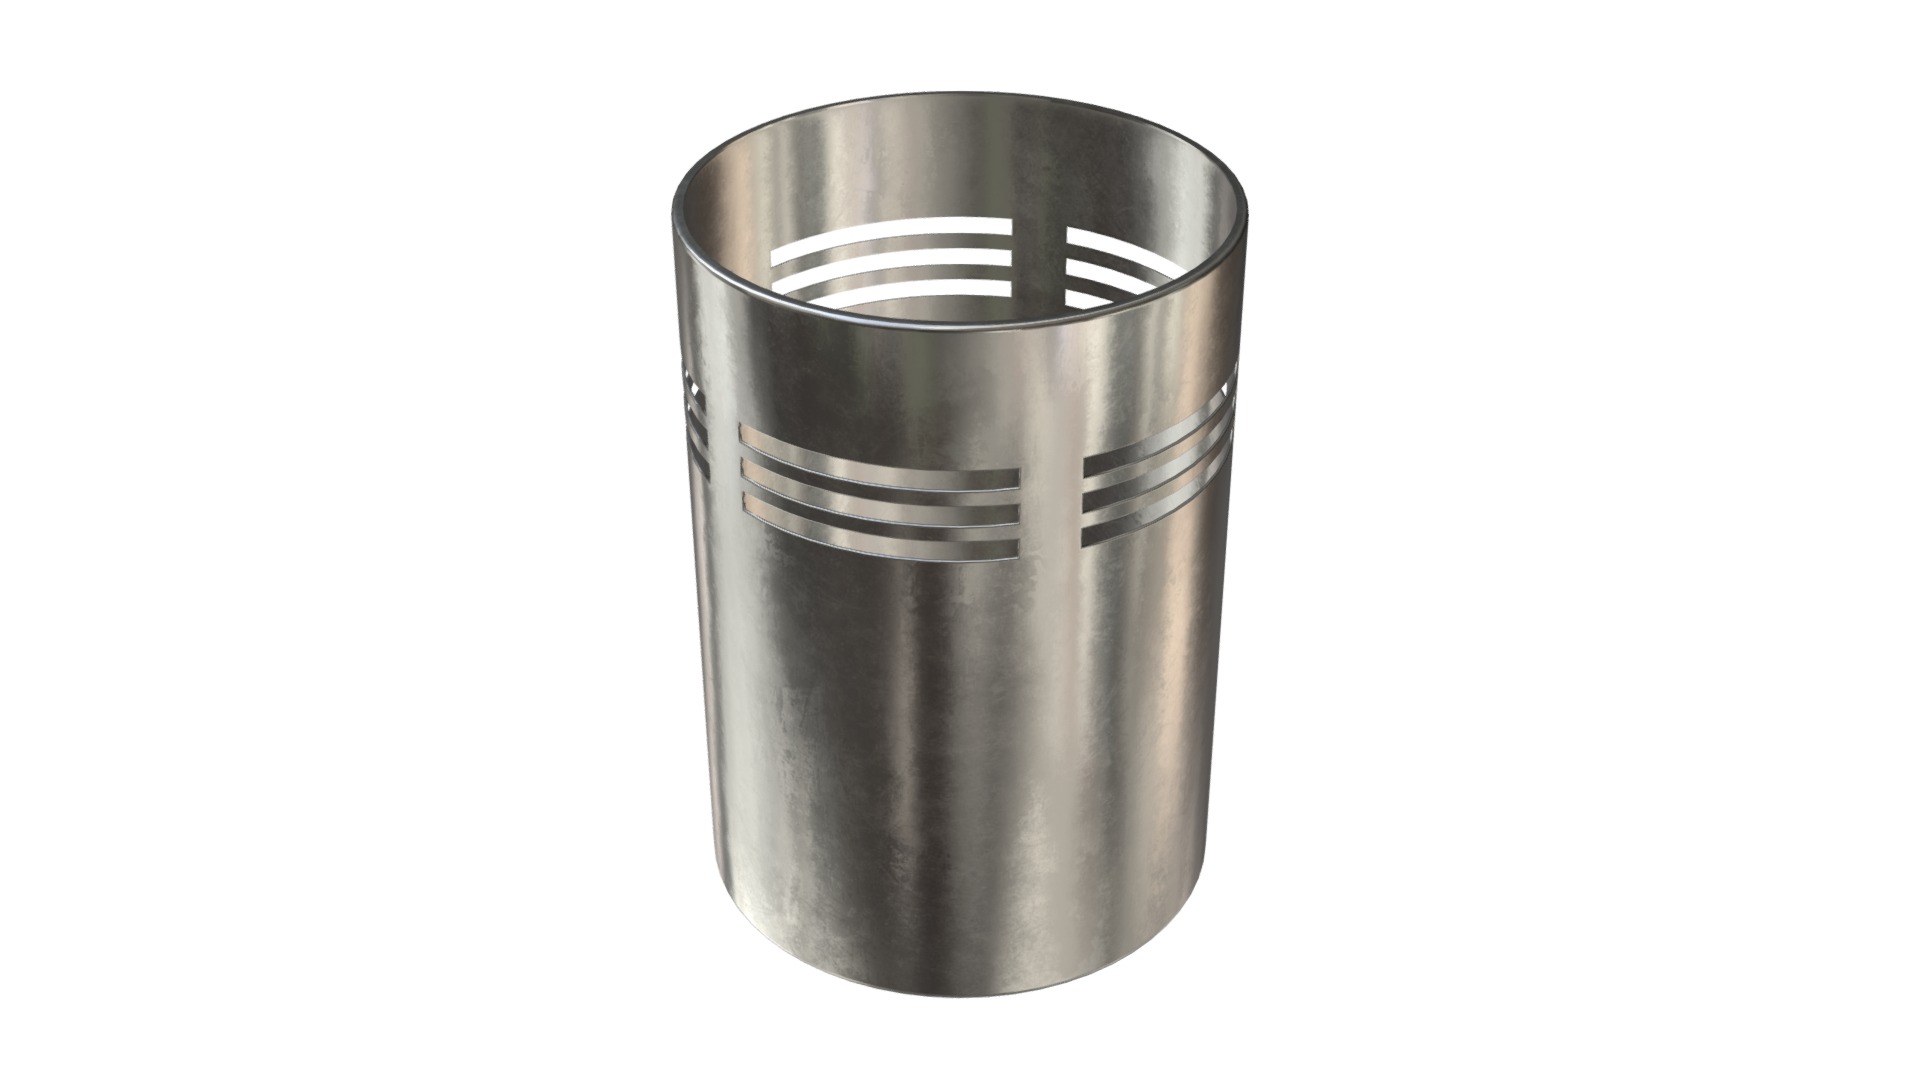 3D model Recycle bin - This is a 3D model of the Recycle bin. The 3D model is about a silver can with a black lid.